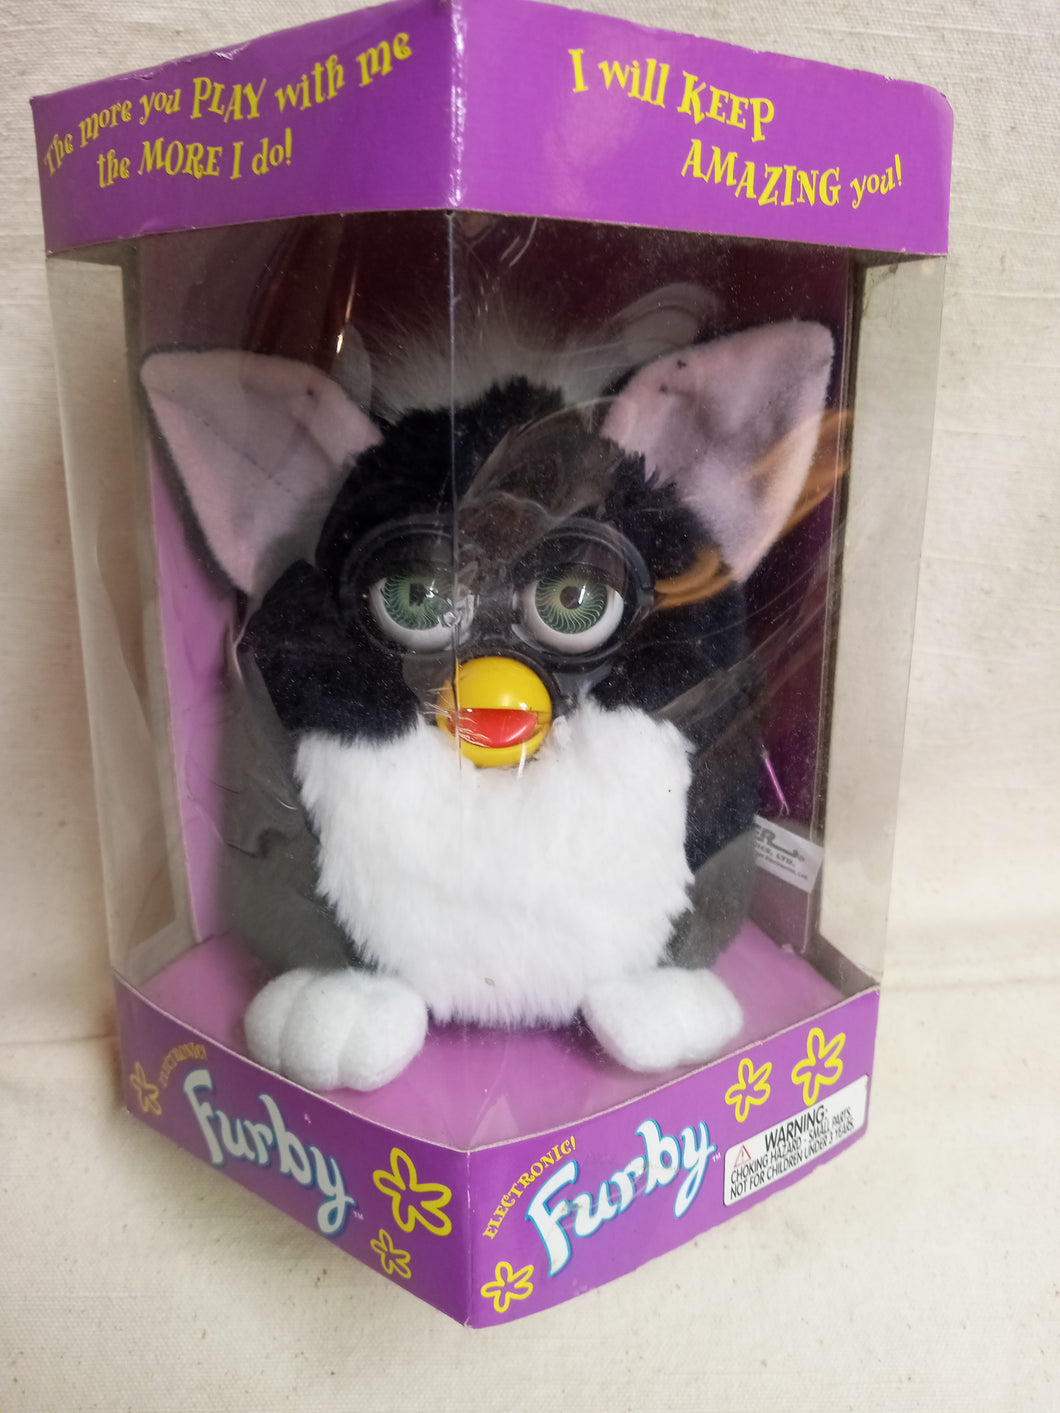 Vintage Model 70-800 Black and White Furby in the Box